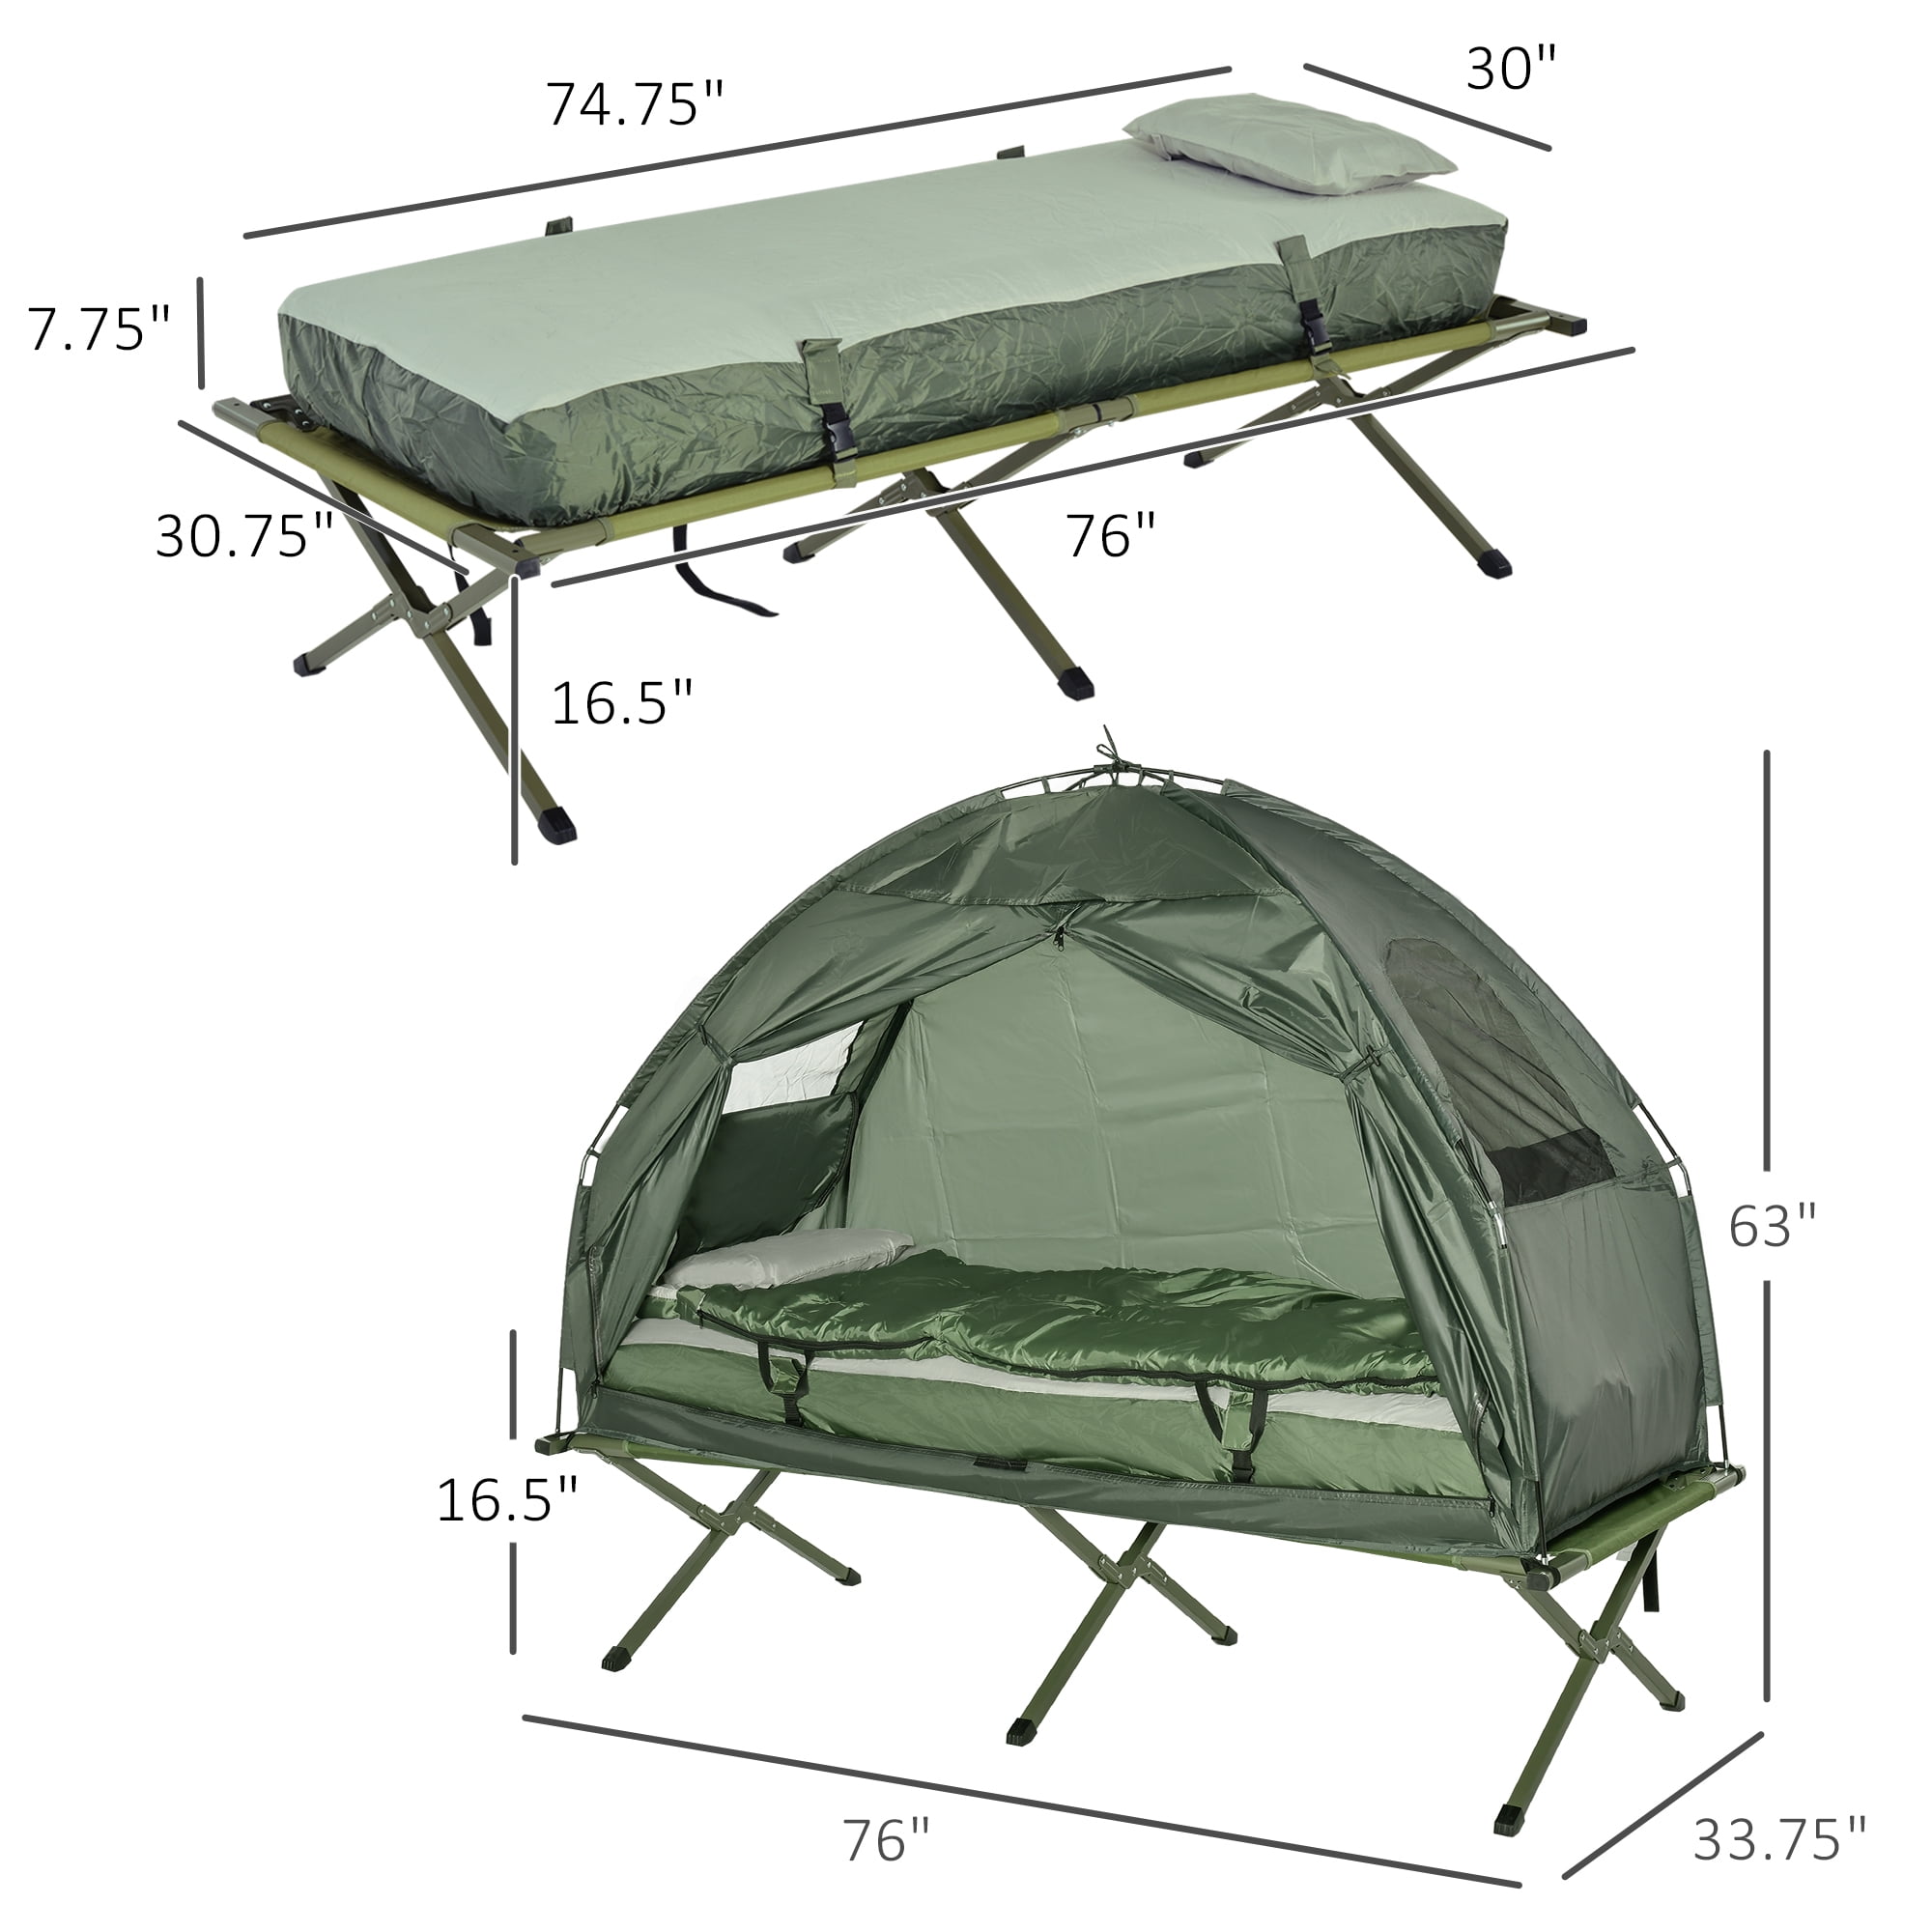 Outsunny Portable Camping Cot Tent with Air Mattress, Sleeping Bag, and  Pillow